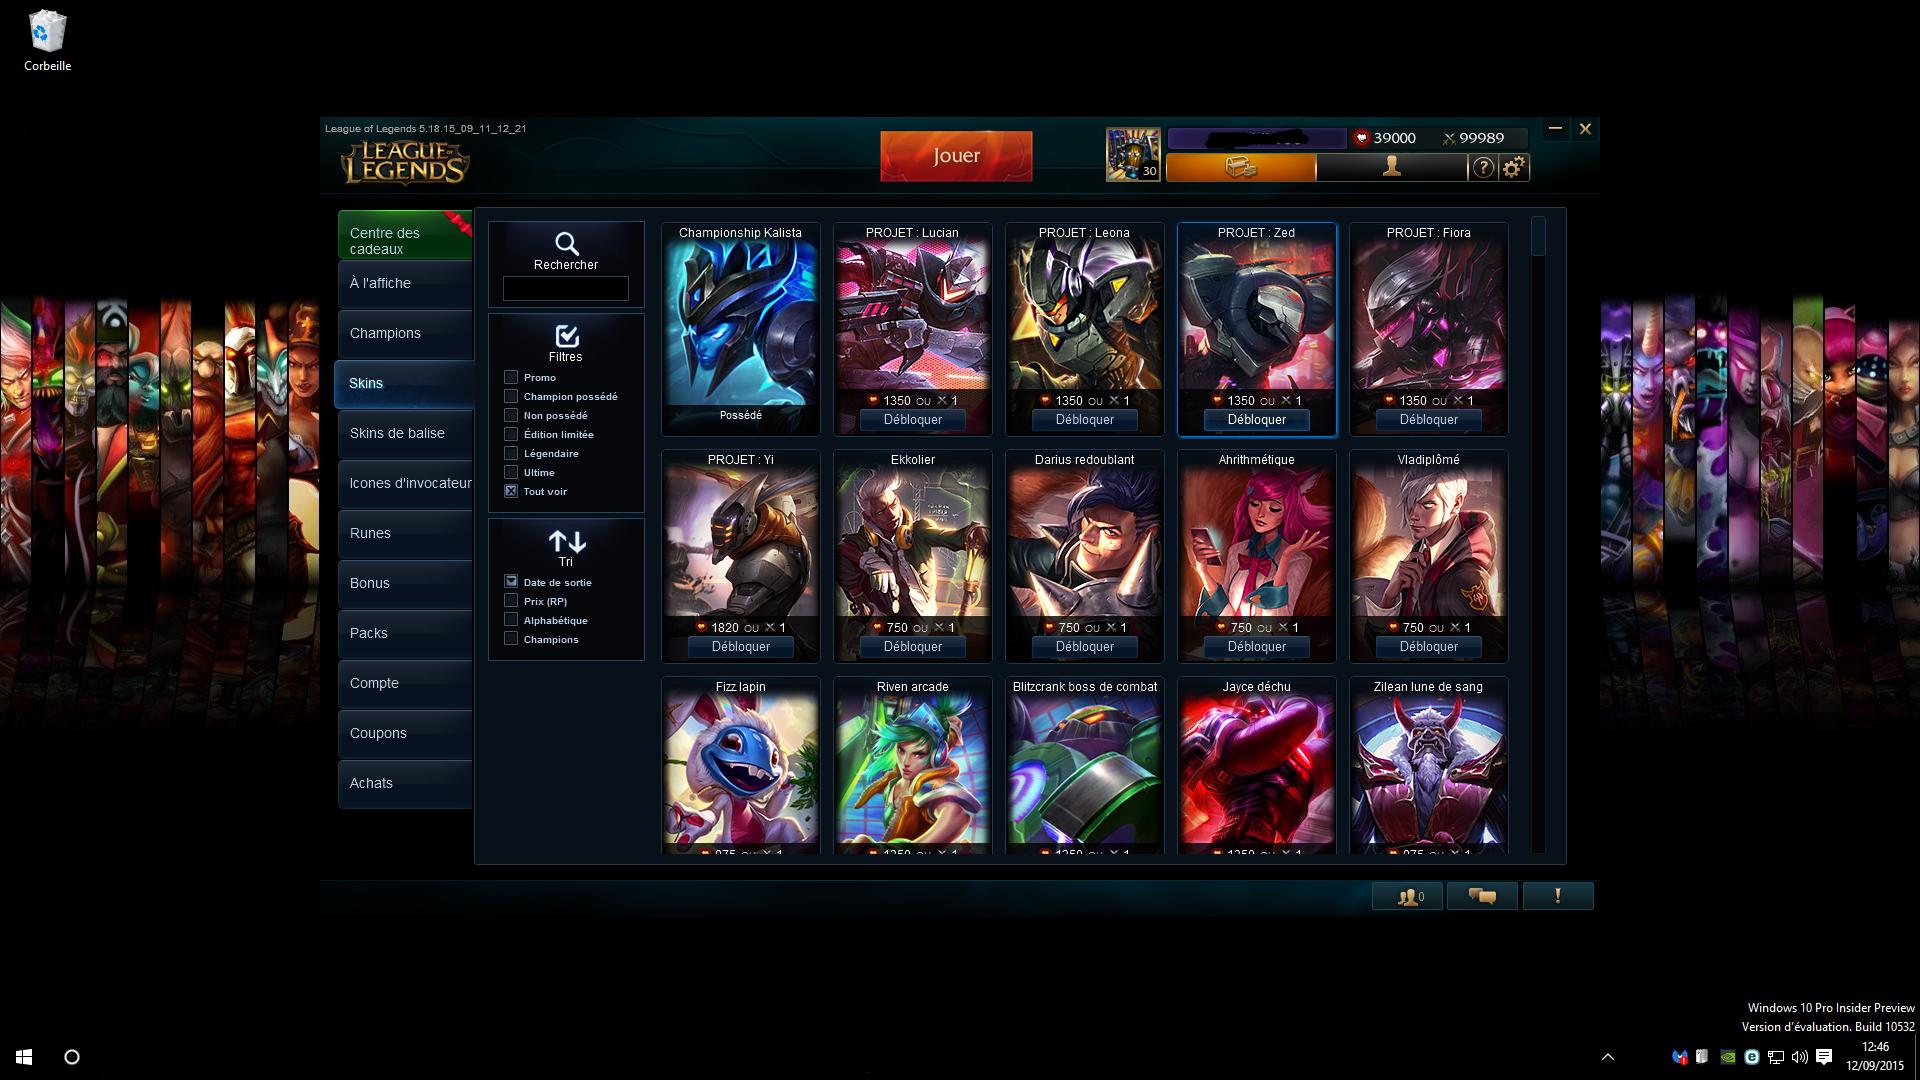 Buy League of Legends Account - LoL Smurf Account For Sale